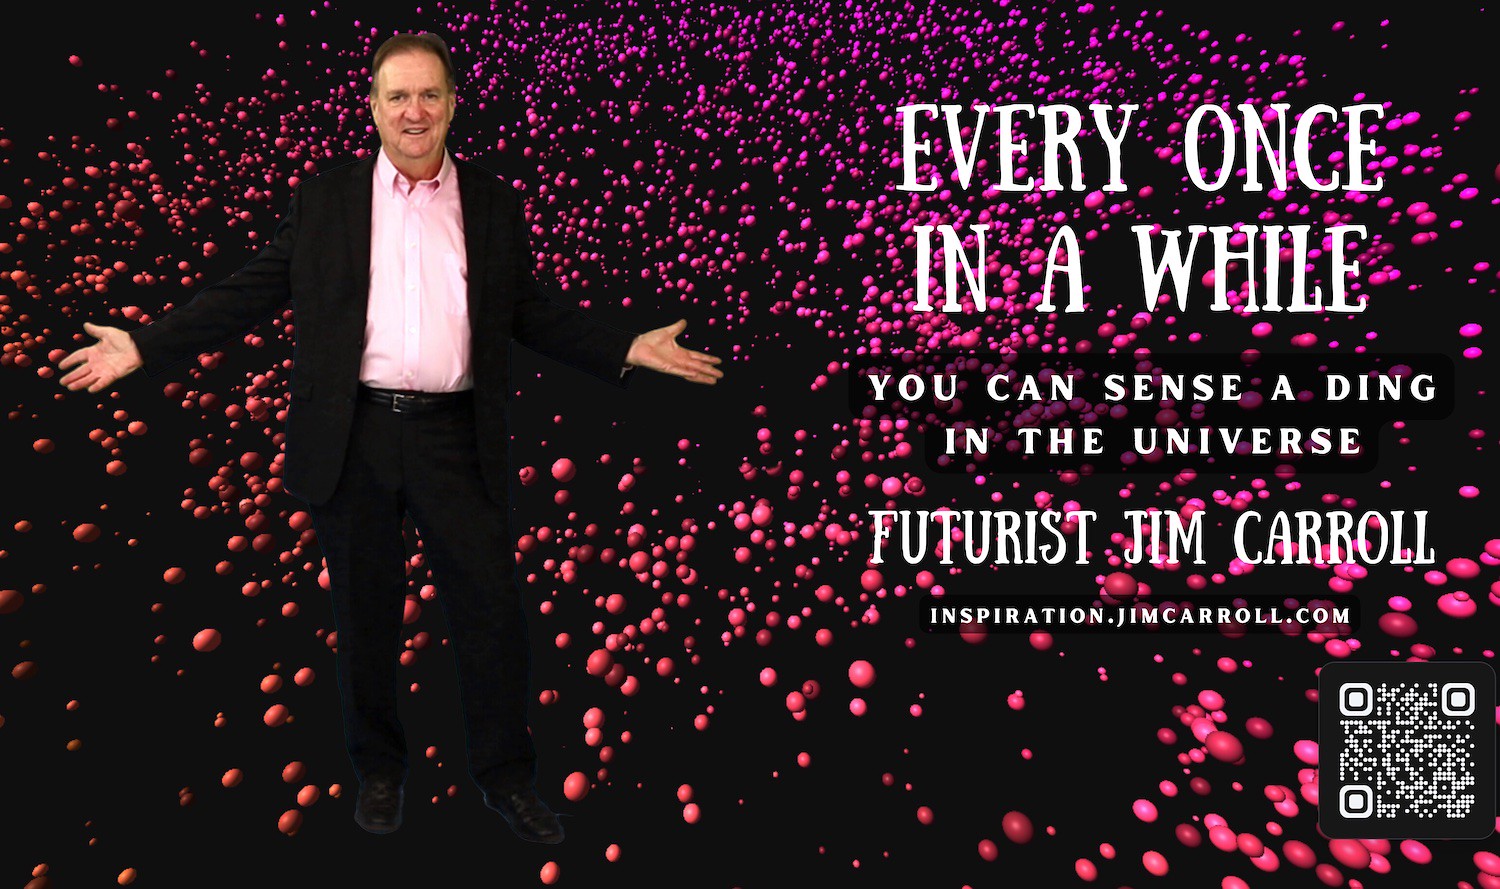 "Every once in a while, you can sense a ding in the universe!" - Futurist Jim Carroll